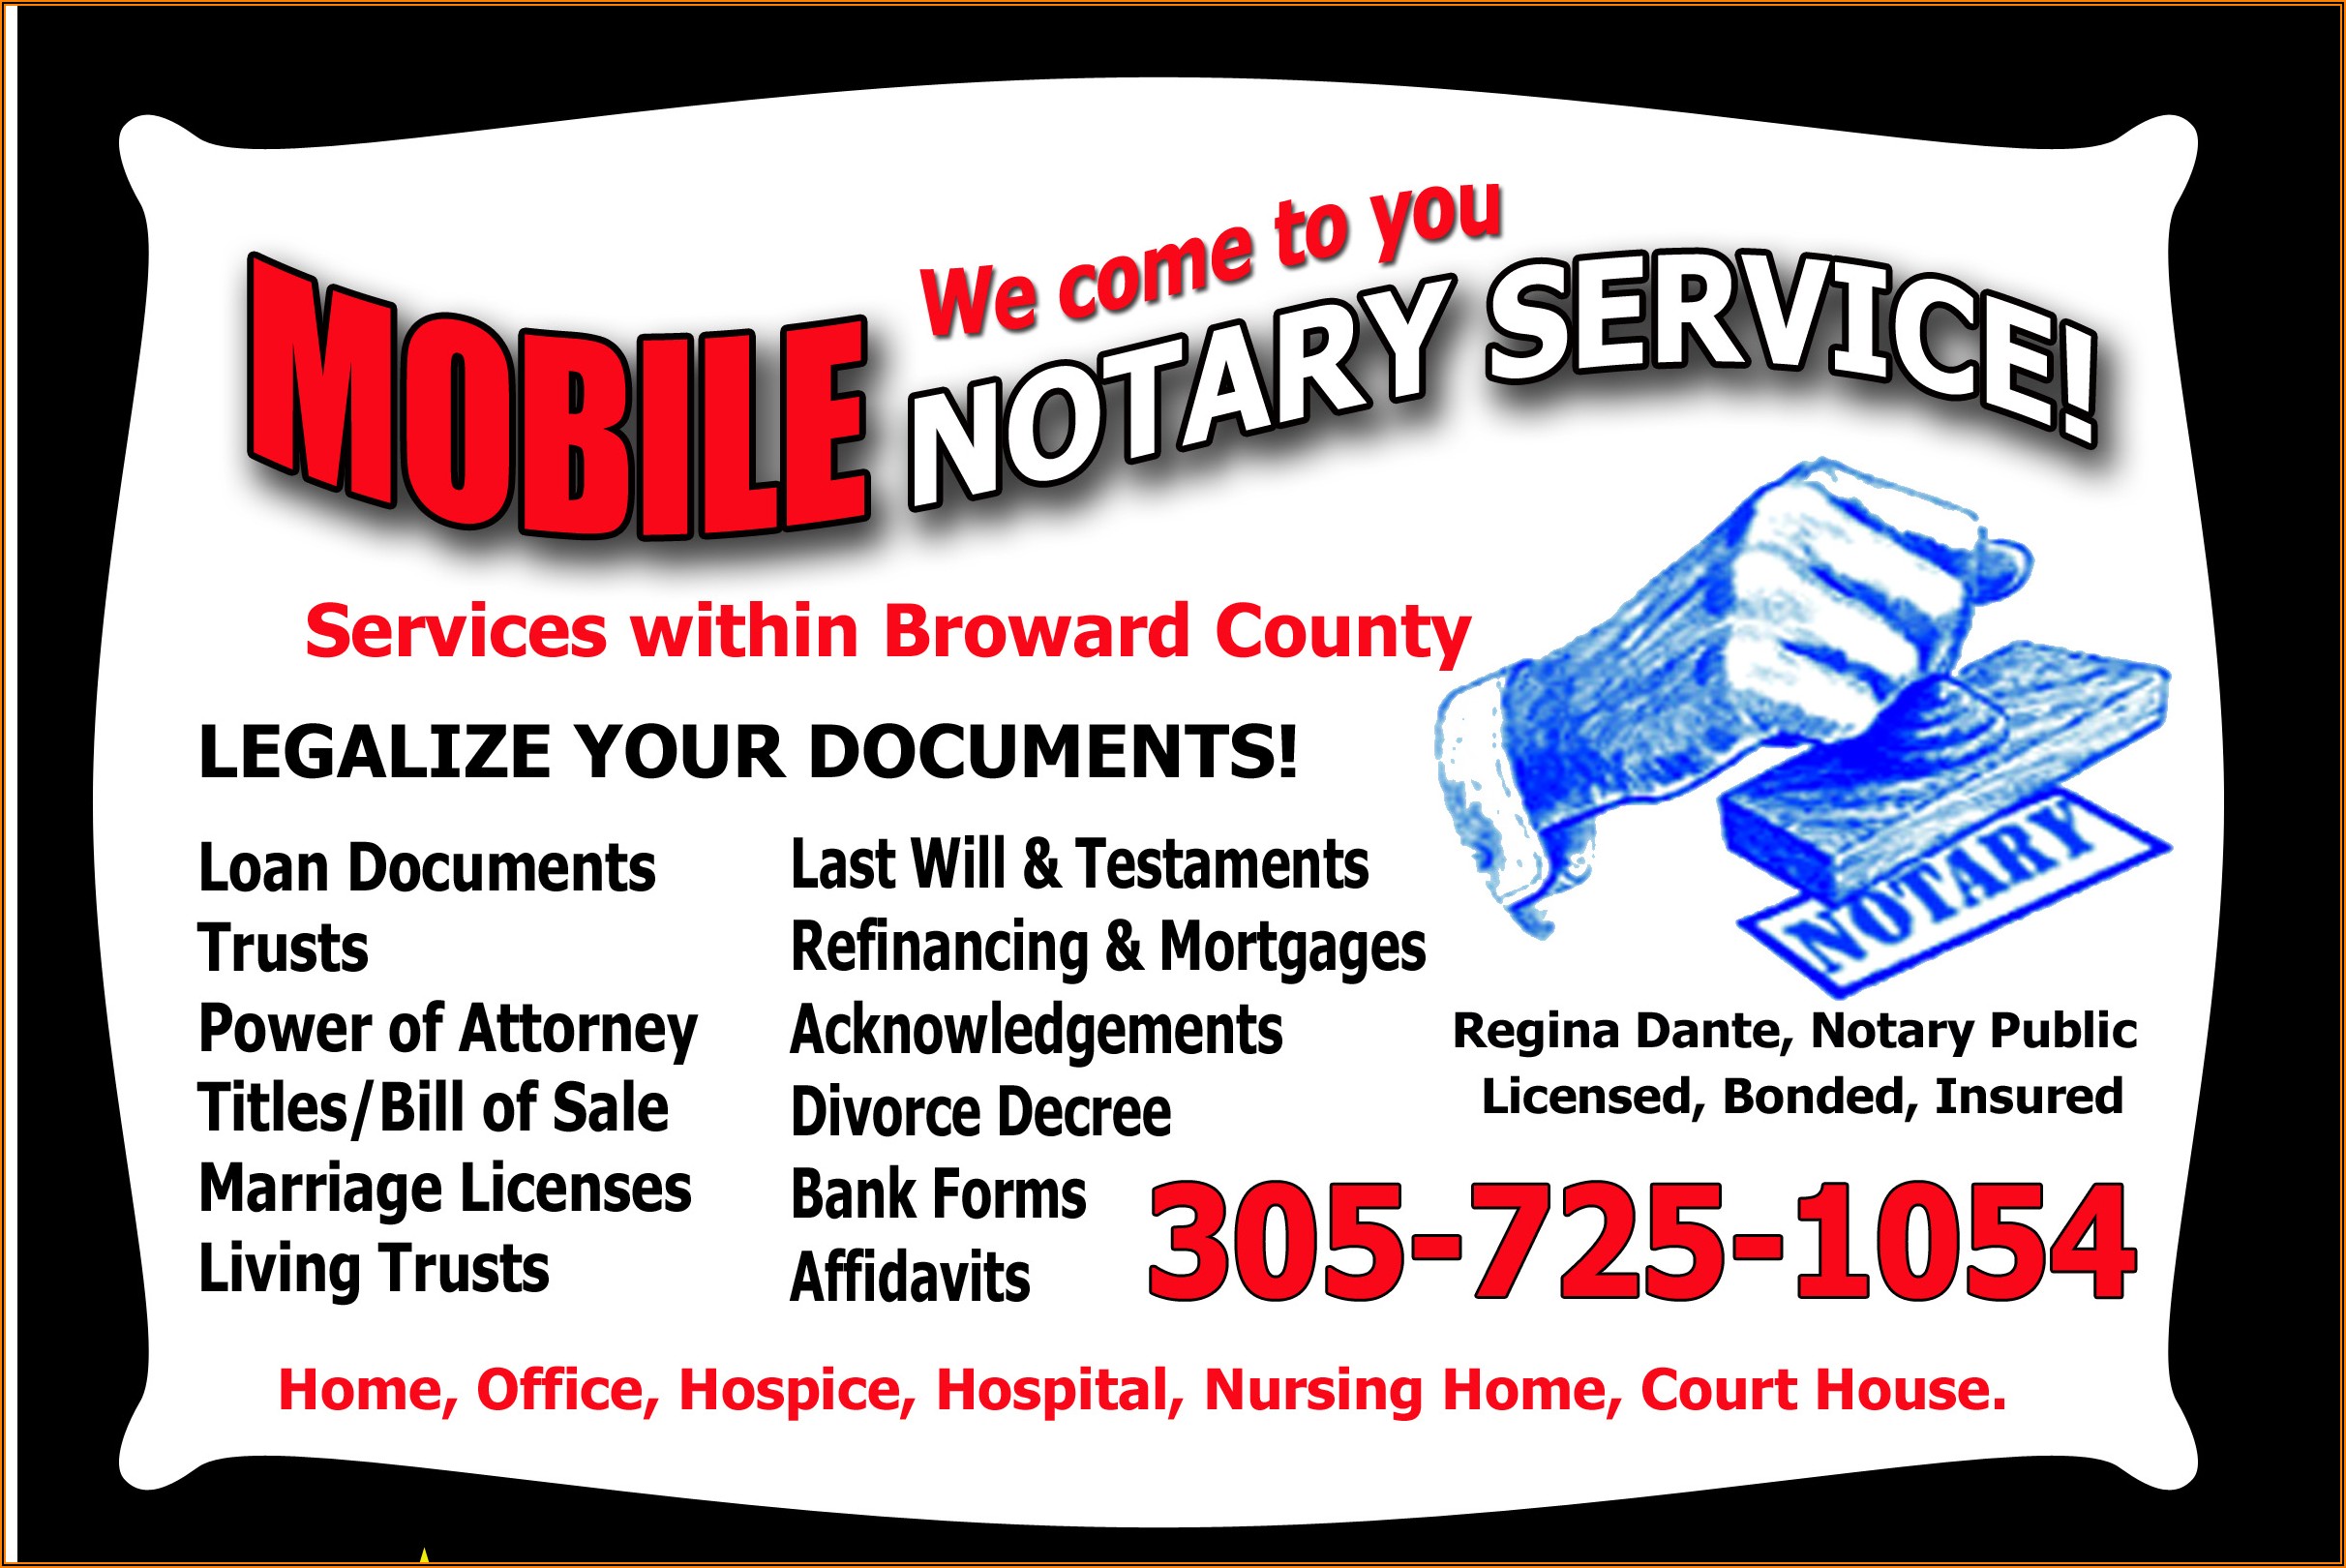 Notary Public Business Card Designs